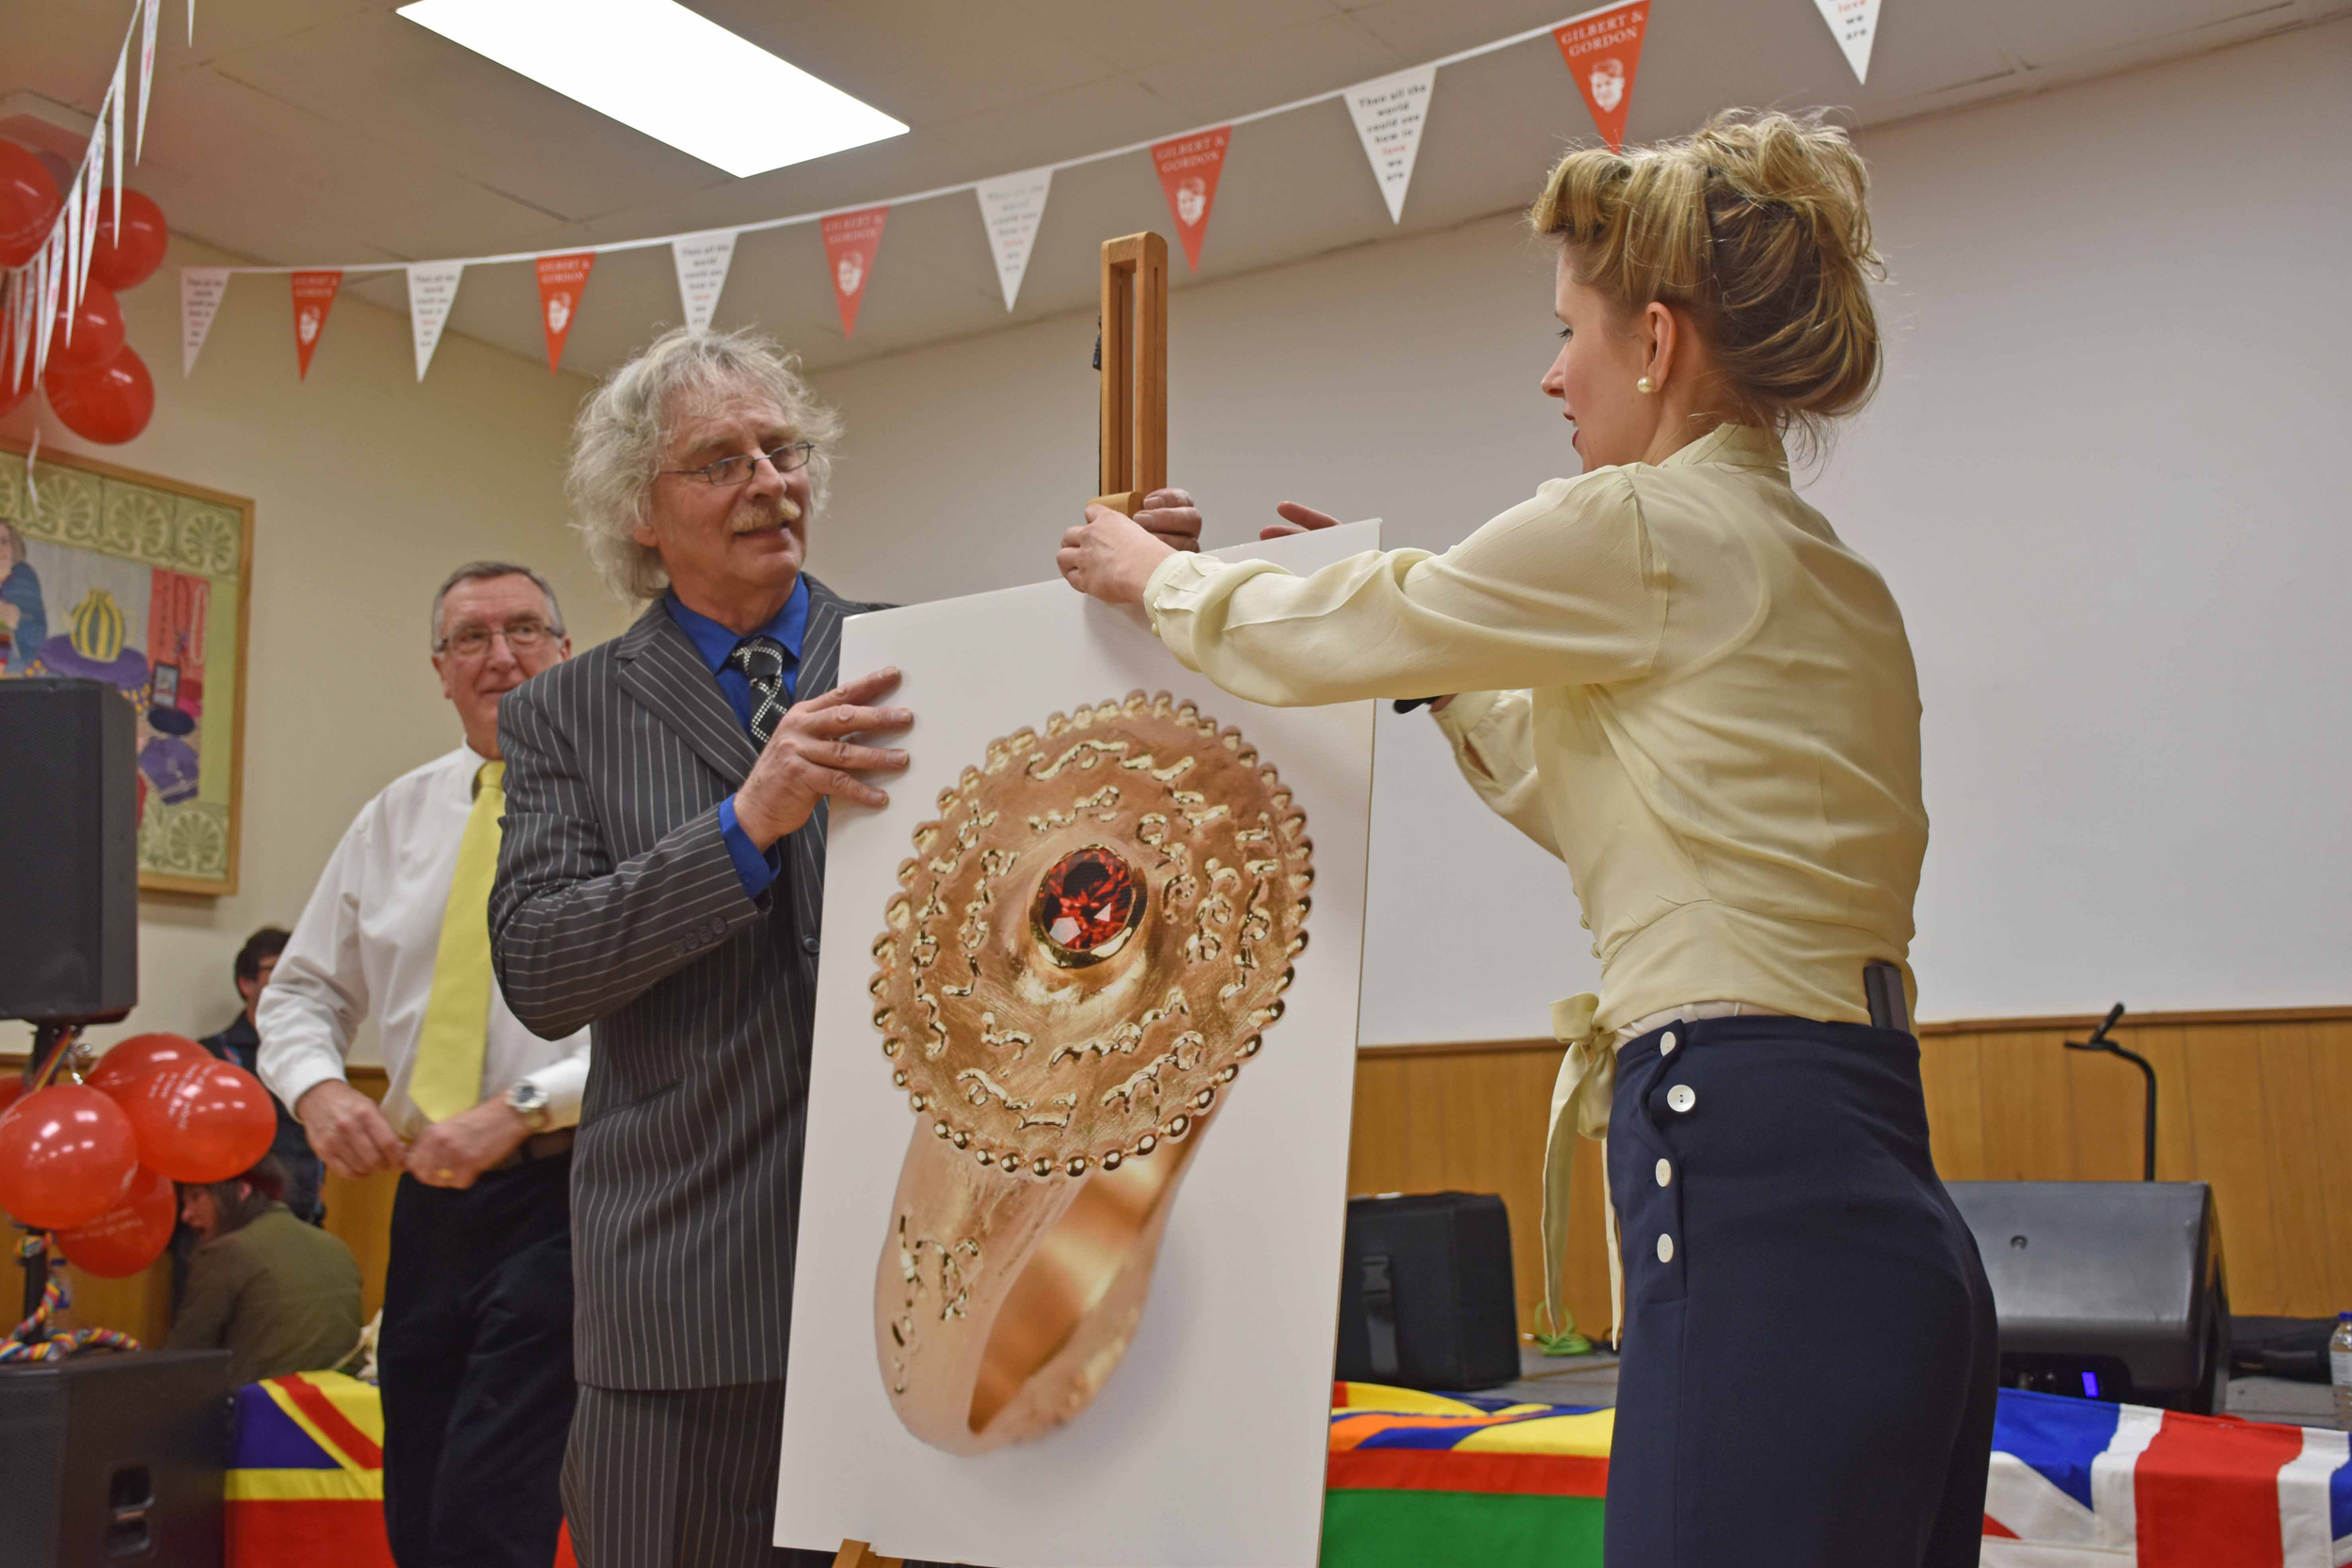 Older man and younger woman in 1940s outfit adjusting a poster of a gold ring with ruby centre.